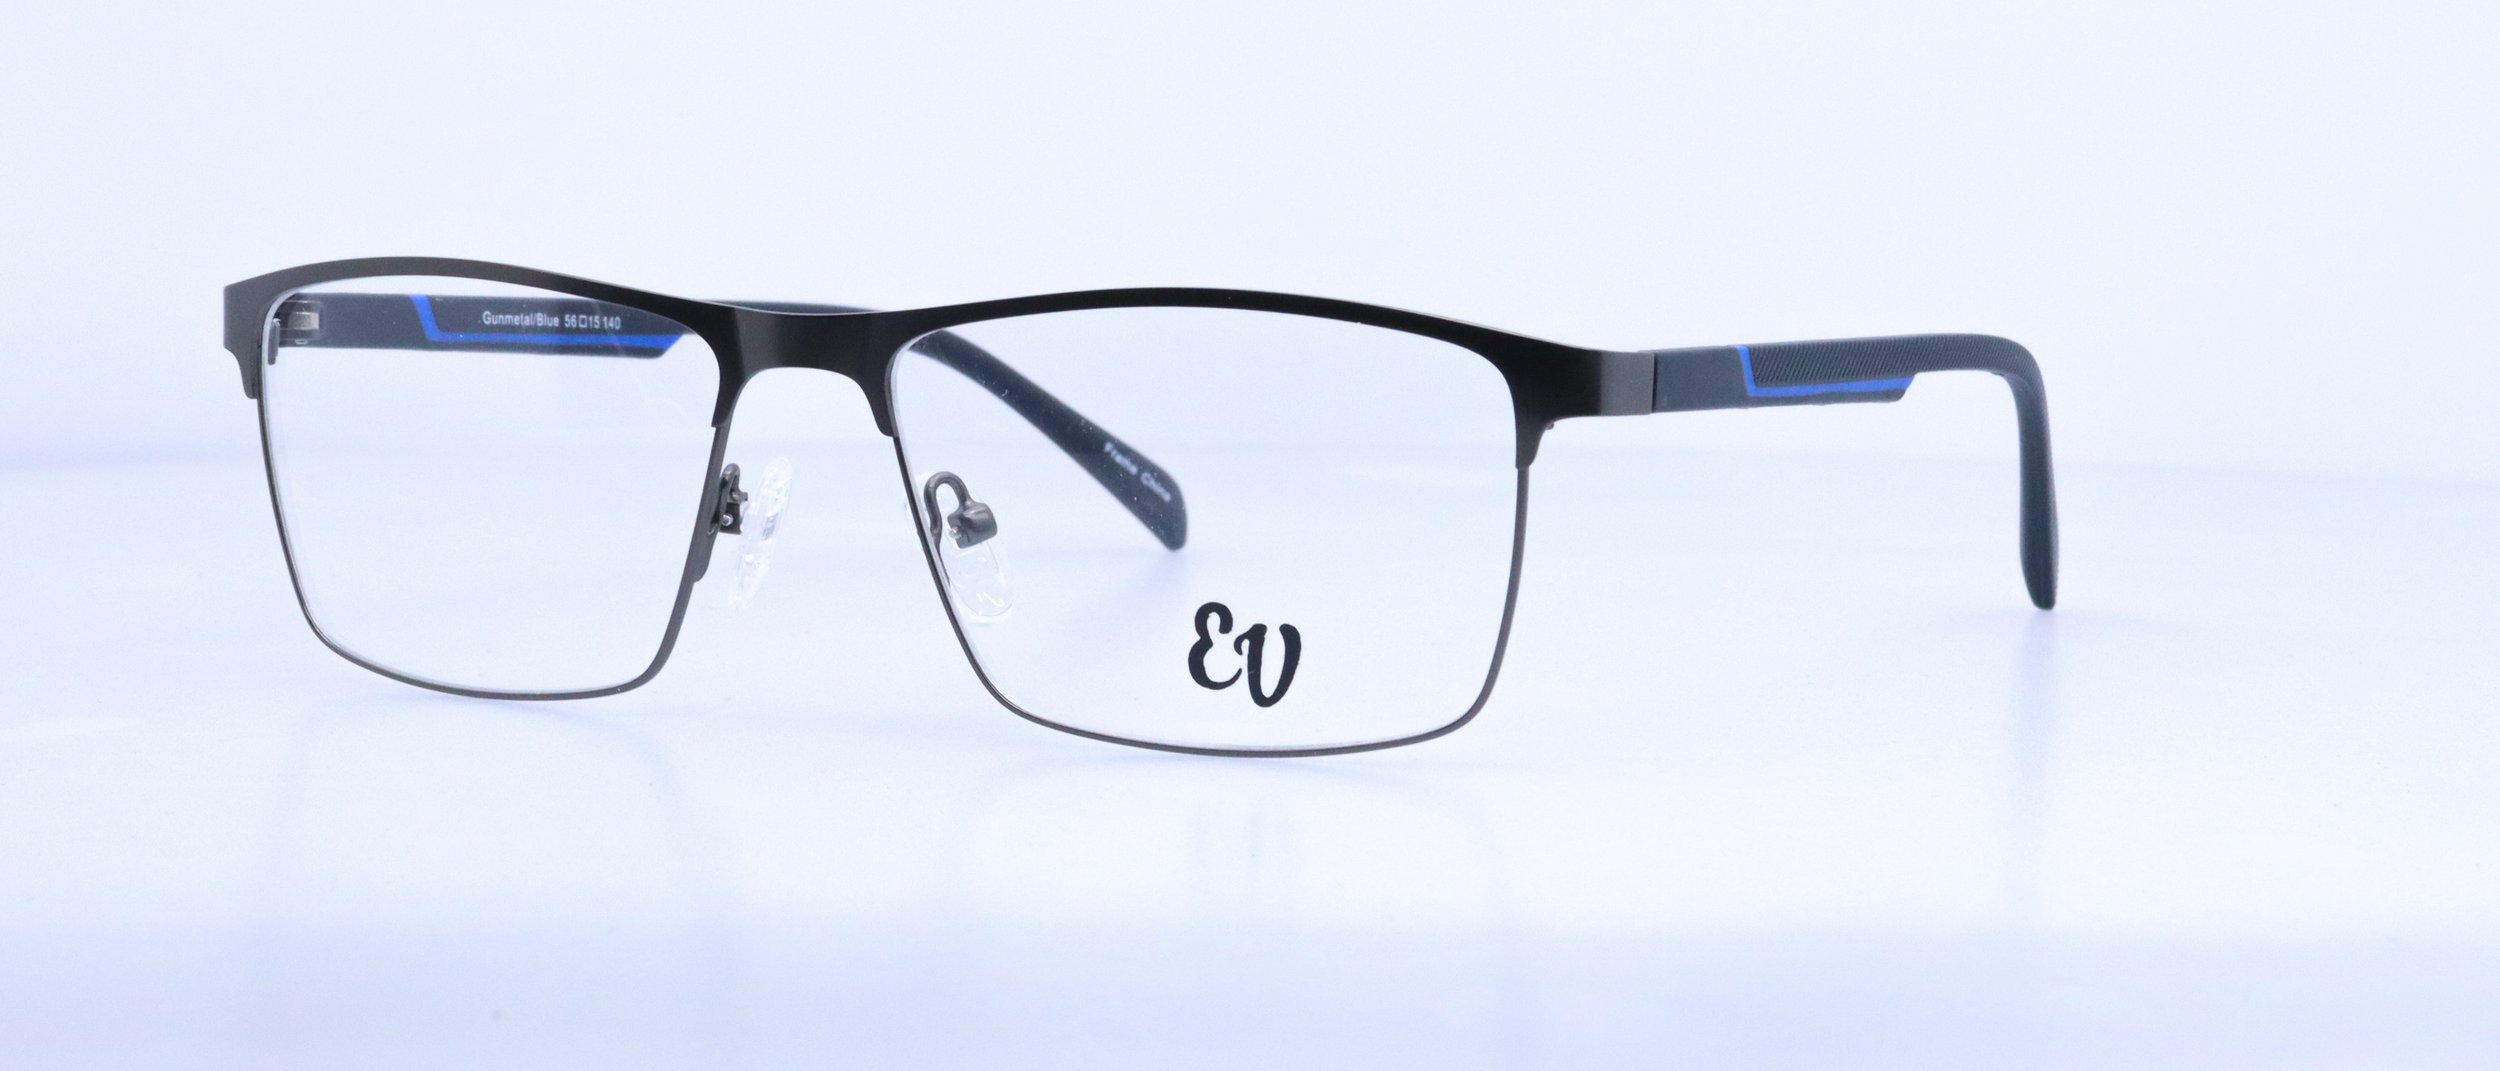  NEW!!! EV406: 56-15-140, Available in Black/Green or Gunmetal/Blue 